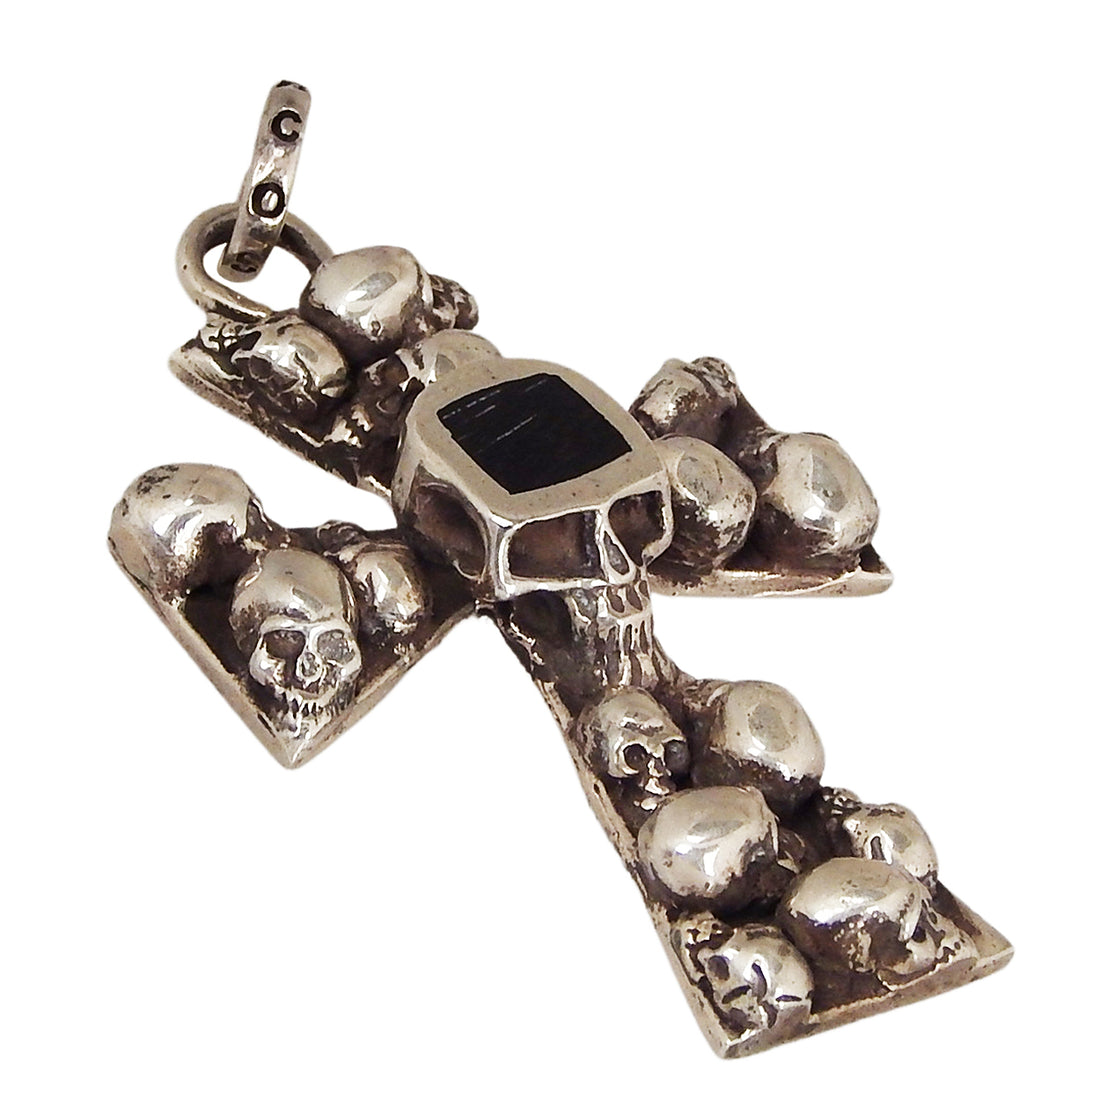 MARCOS - "MULTI-SKULL CROSS" Pendant in Sterling Silver with inlaid Ebony Wood